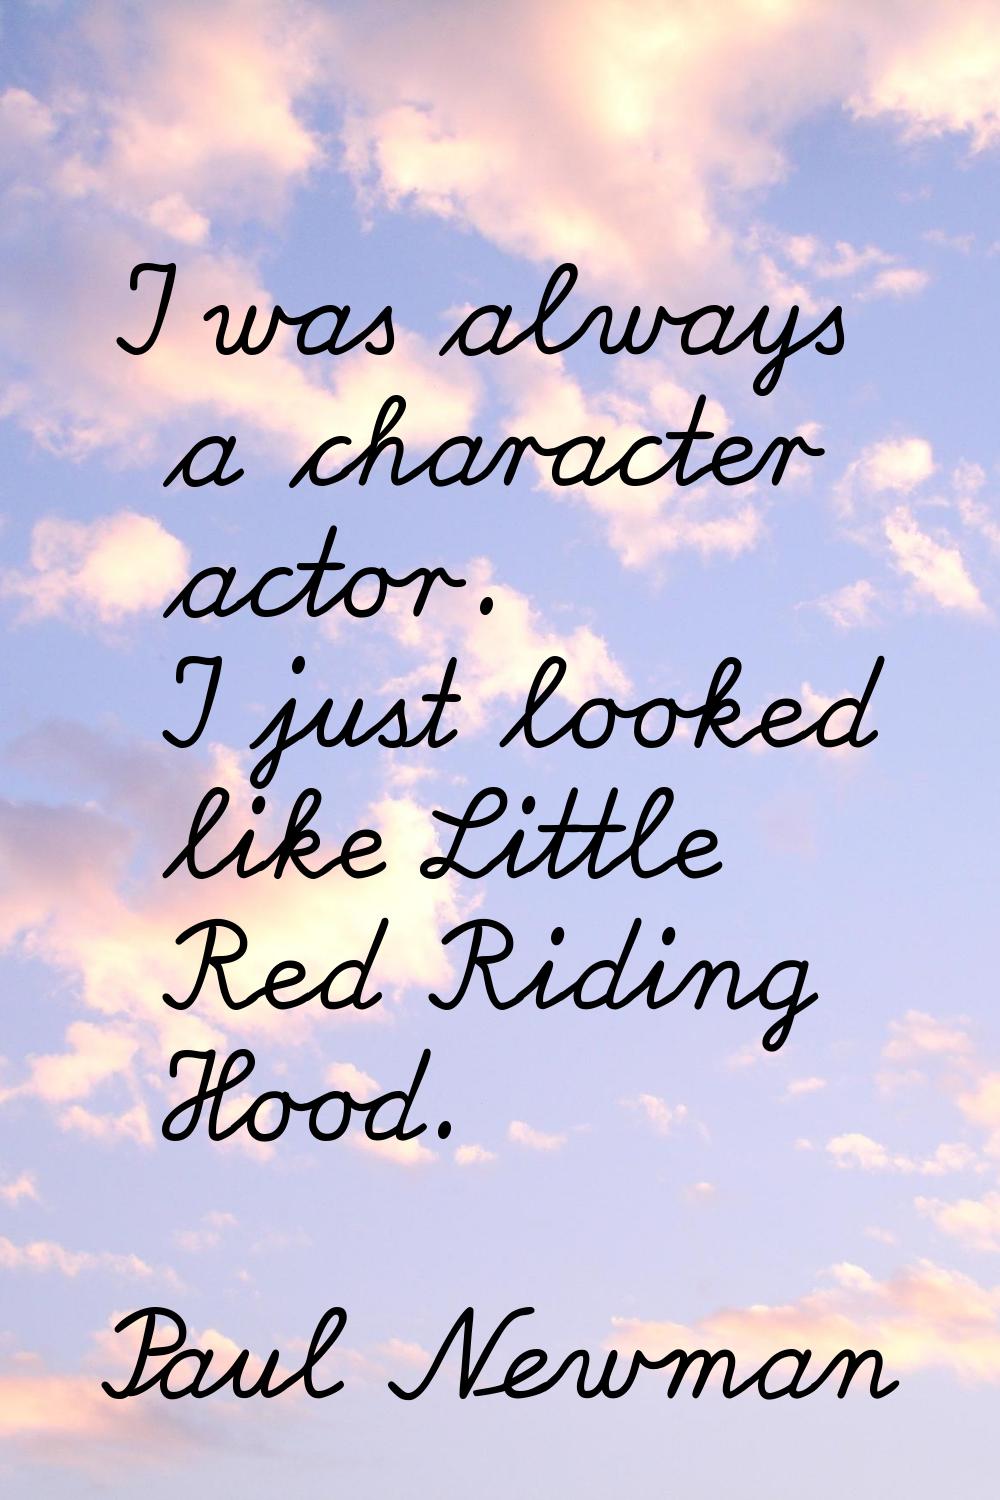 I was always a character actor. I just looked like Little Red Riding Hood.